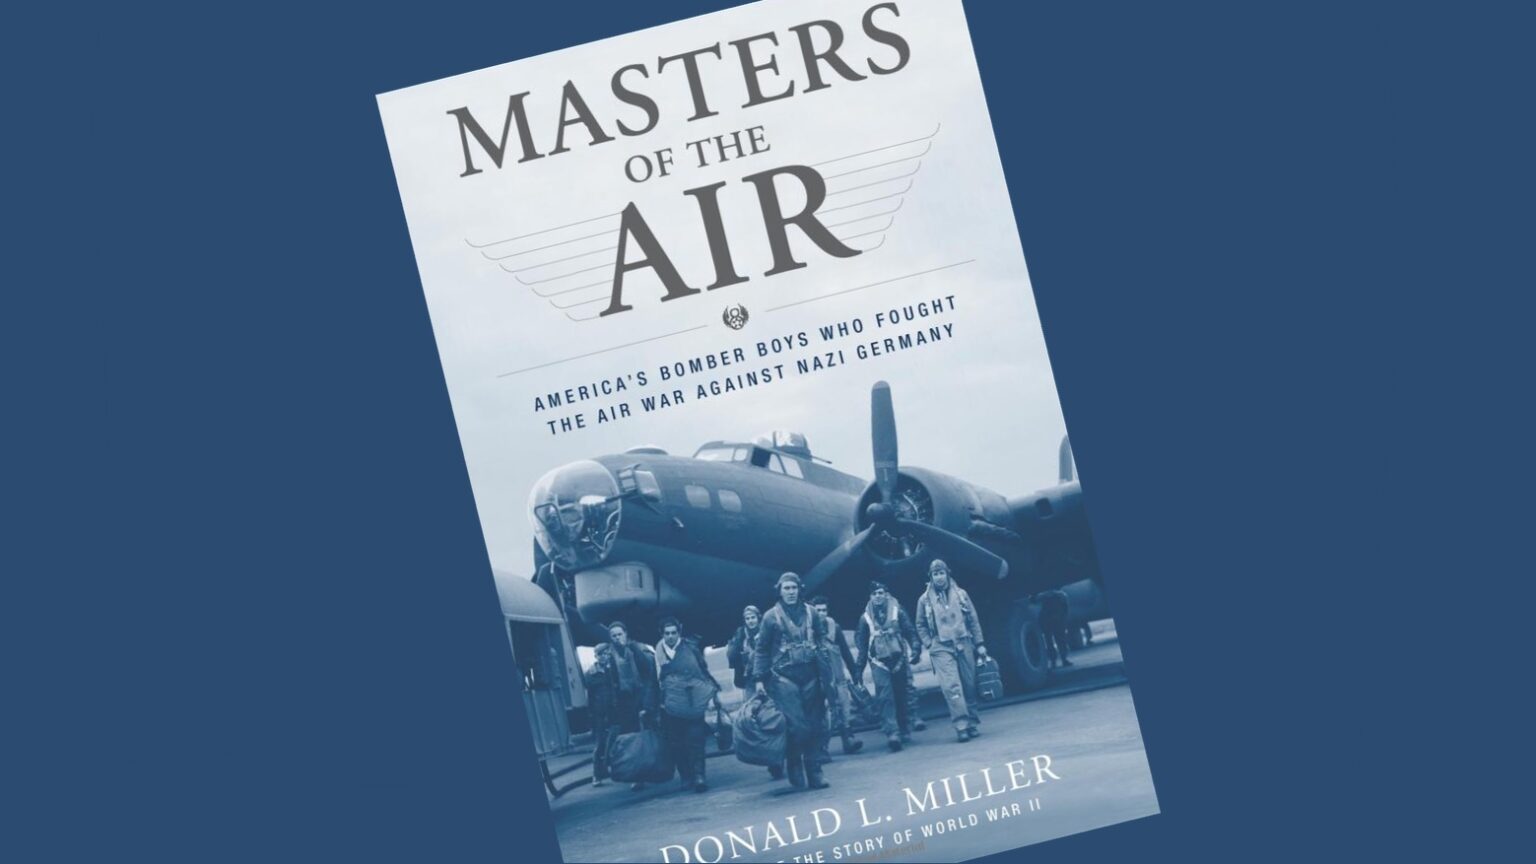 Apple TV+ will adapt ‘Masters of the Air’ into a limited series.